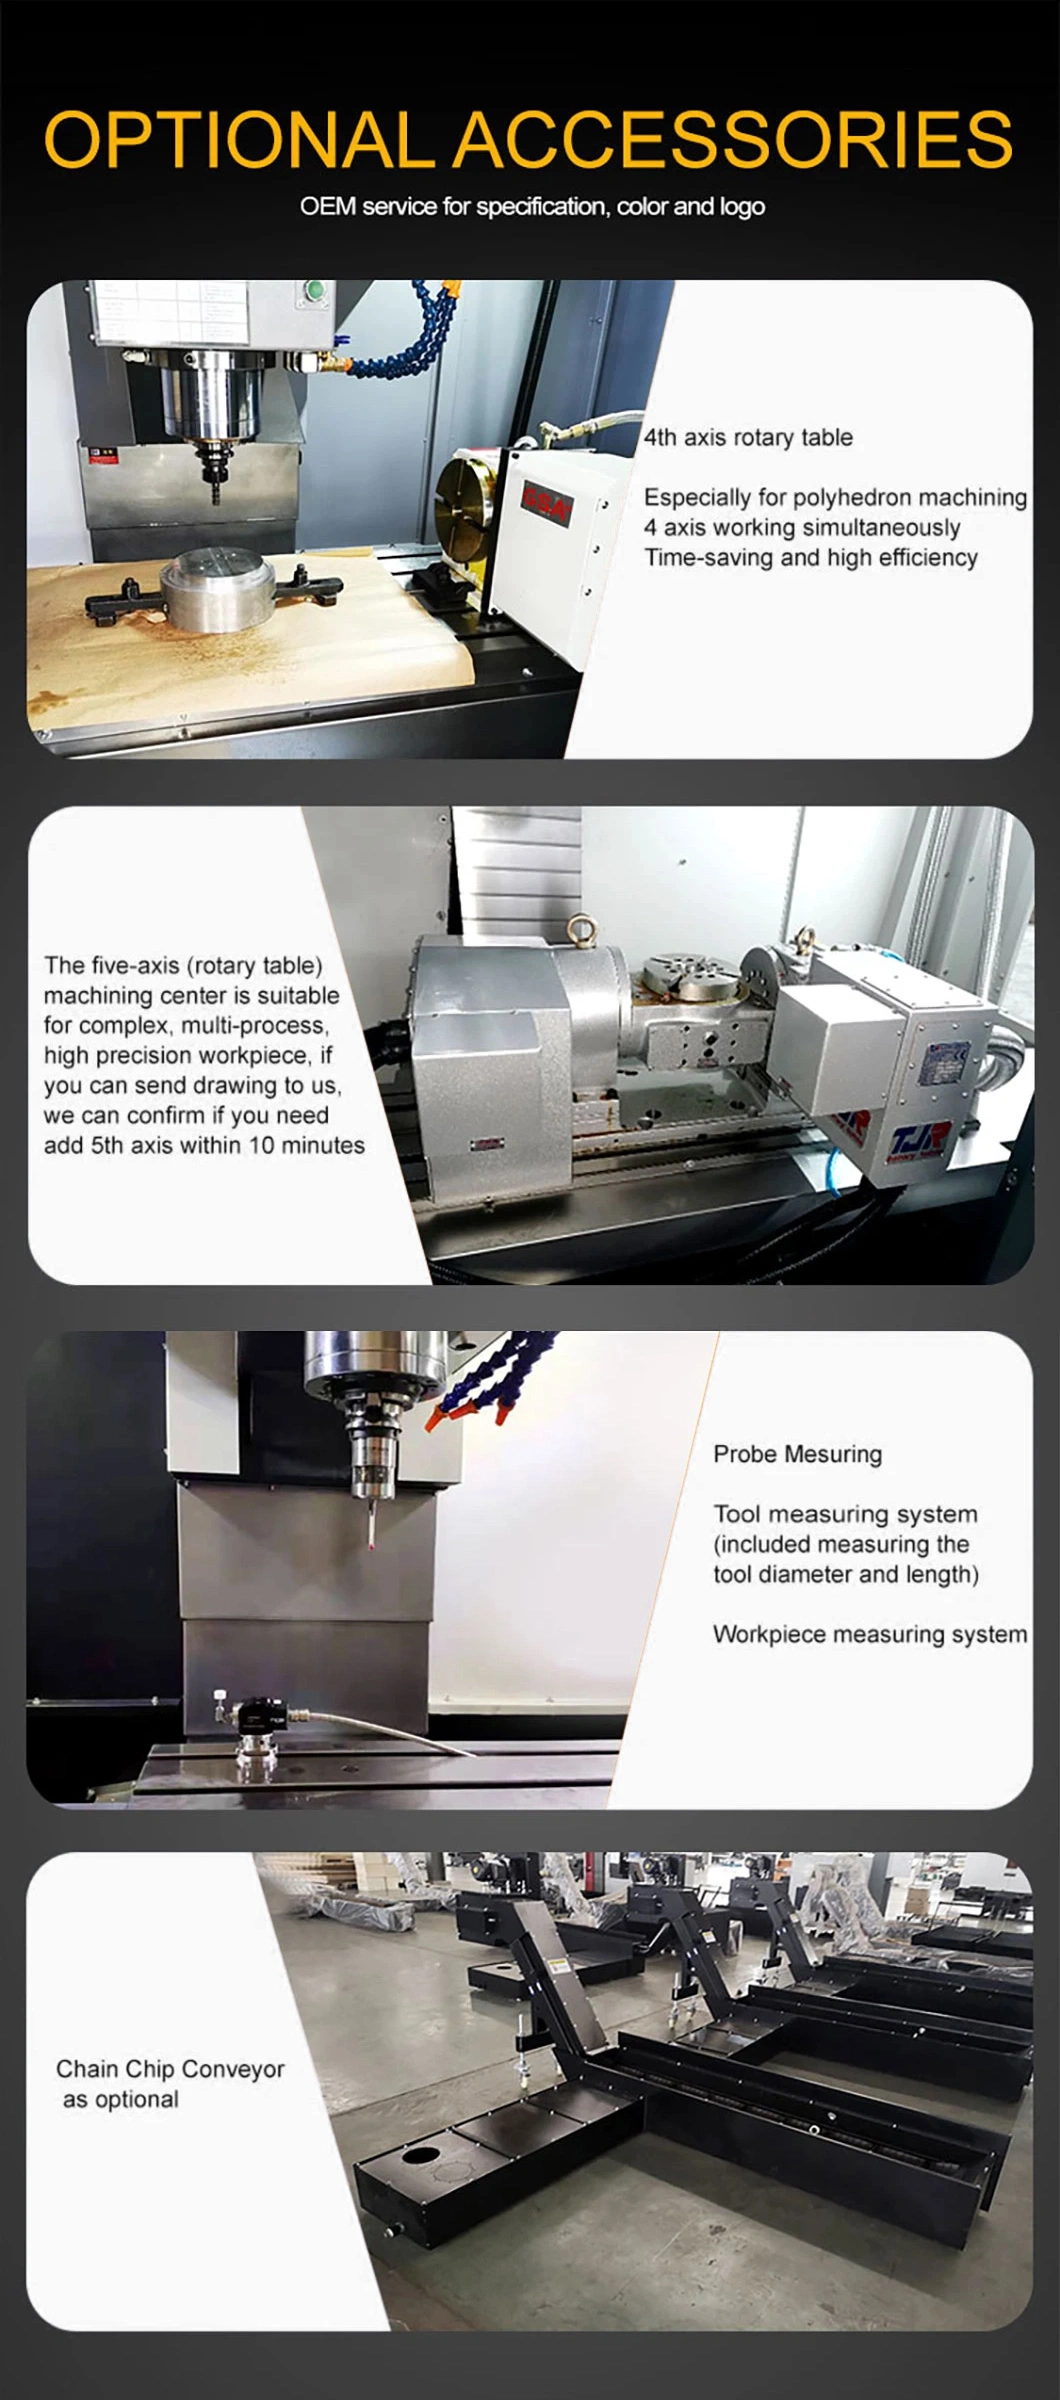 UC-400 Heavy Duty Automatic Changer Metalworking Vertical CNC Milling Machine with Metal Processing with 5 Axis